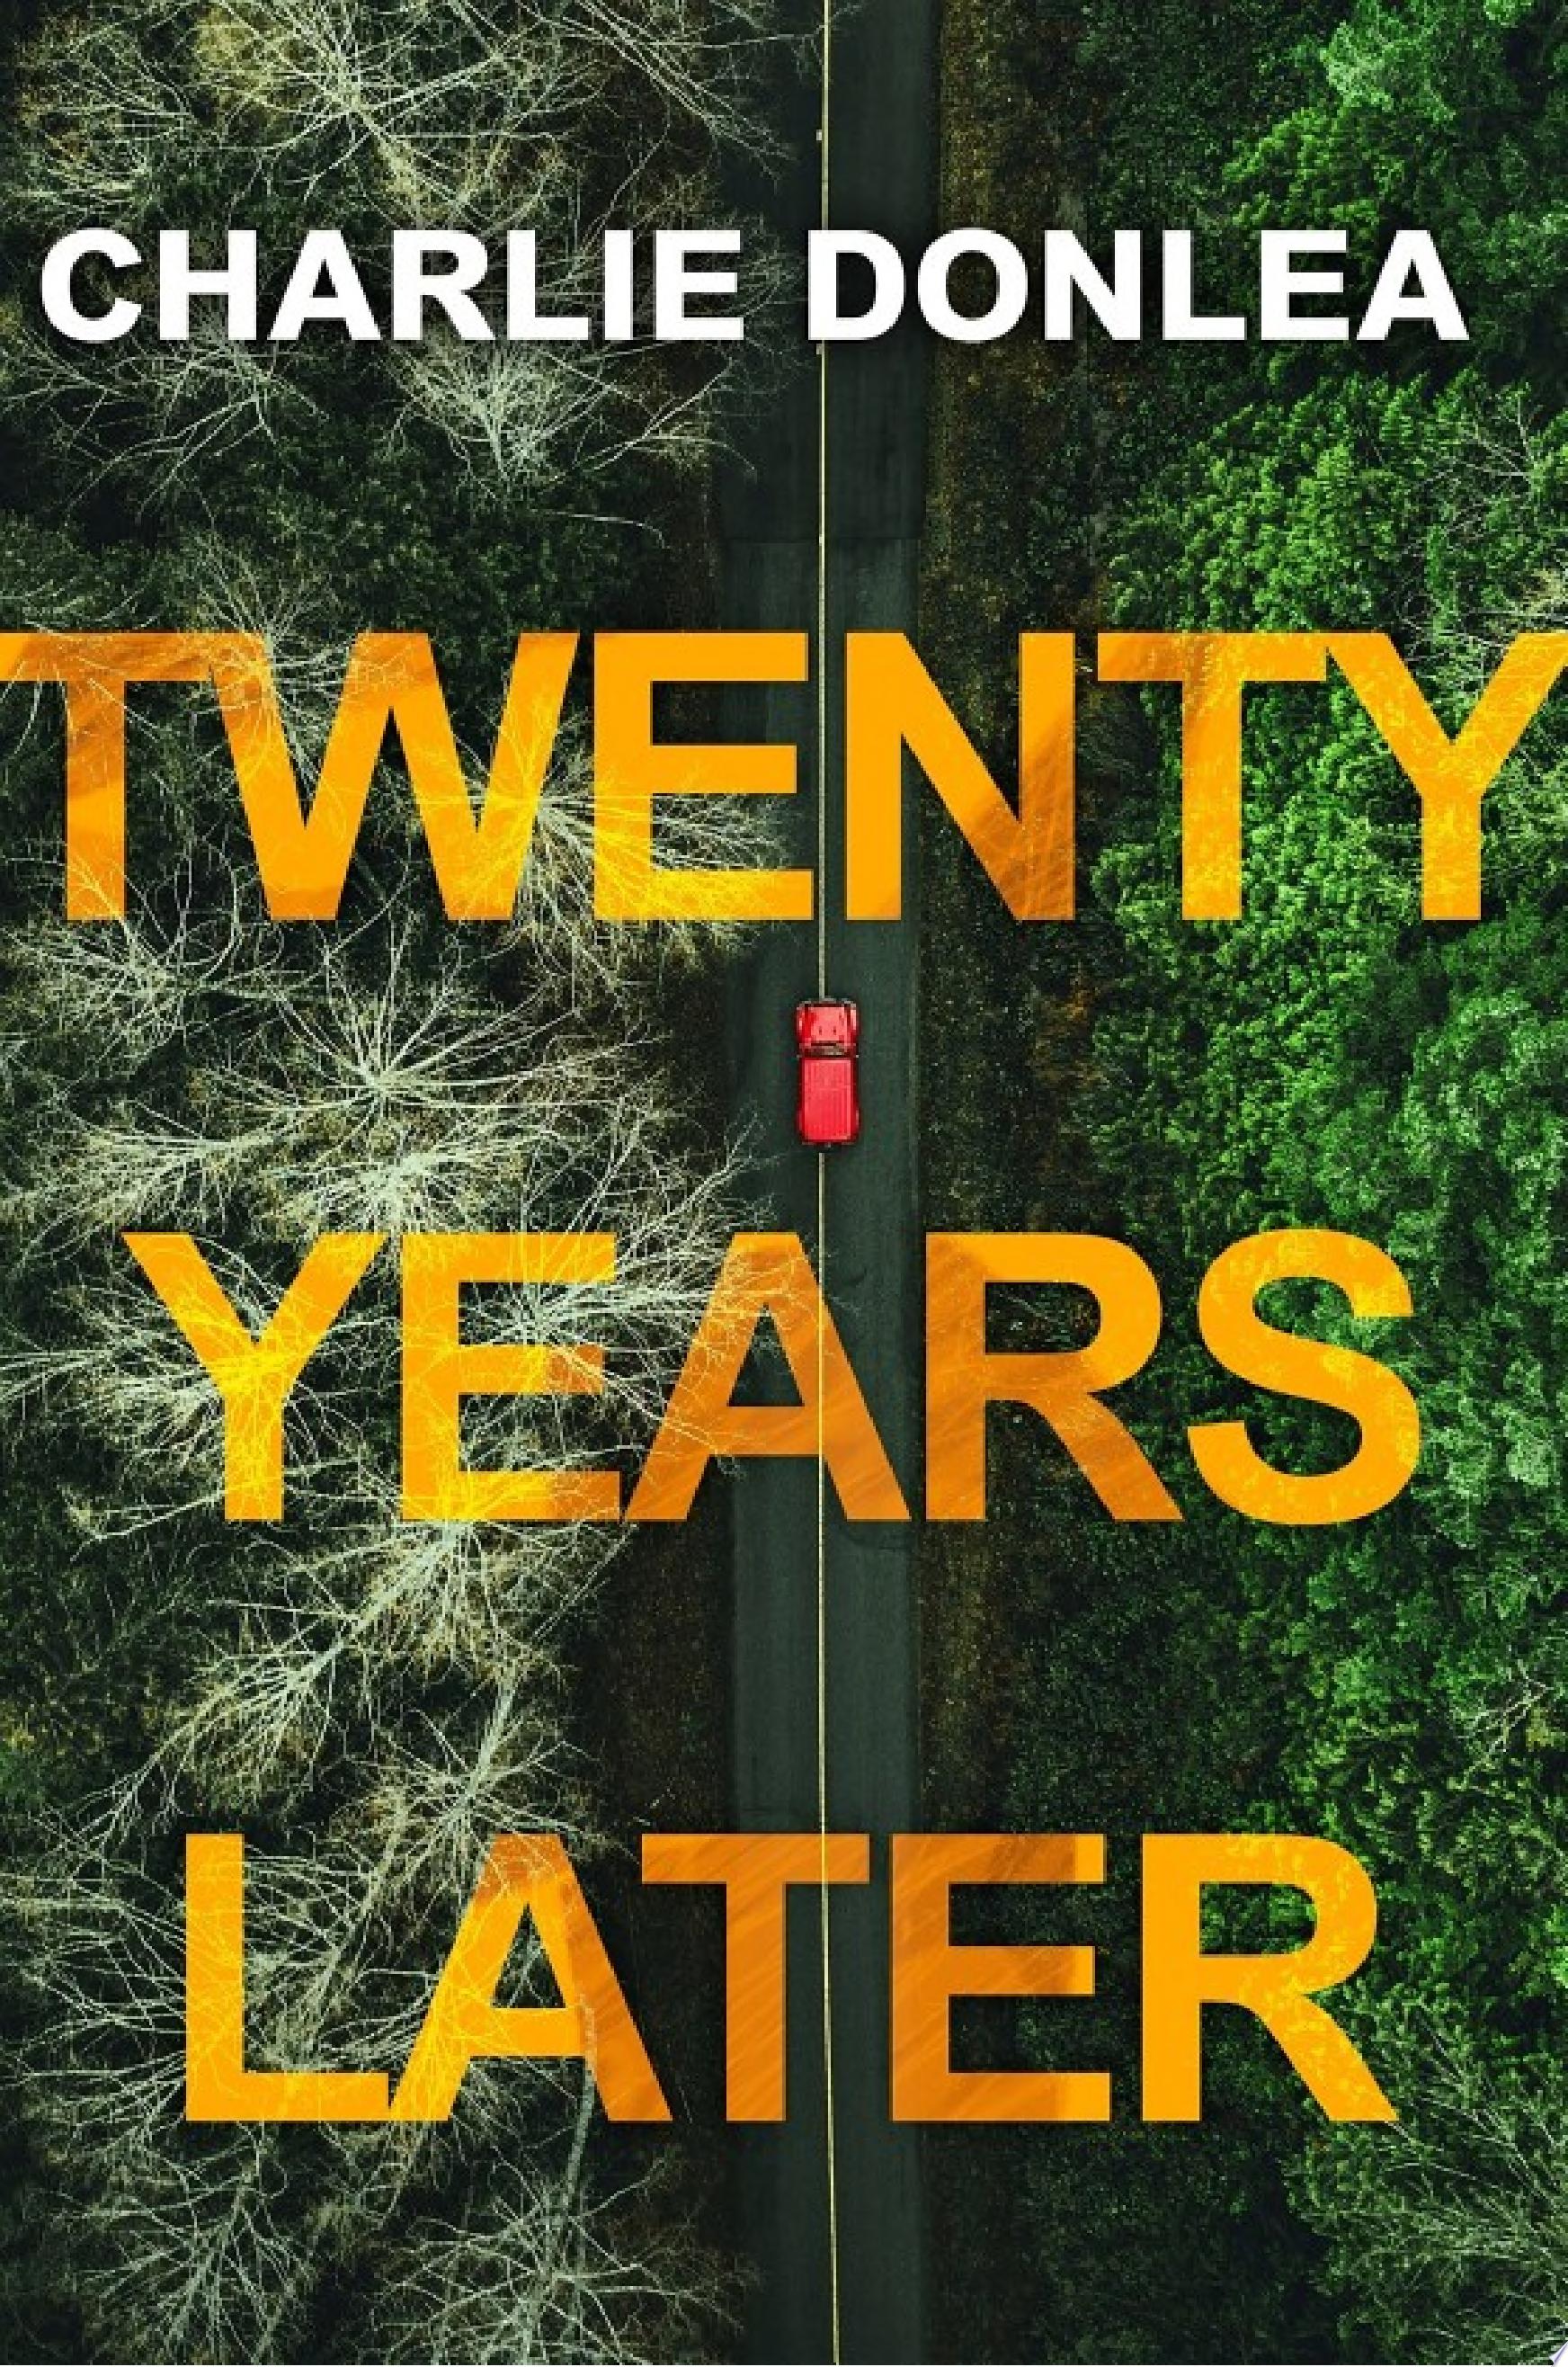 Image for "Twenty Years Later"